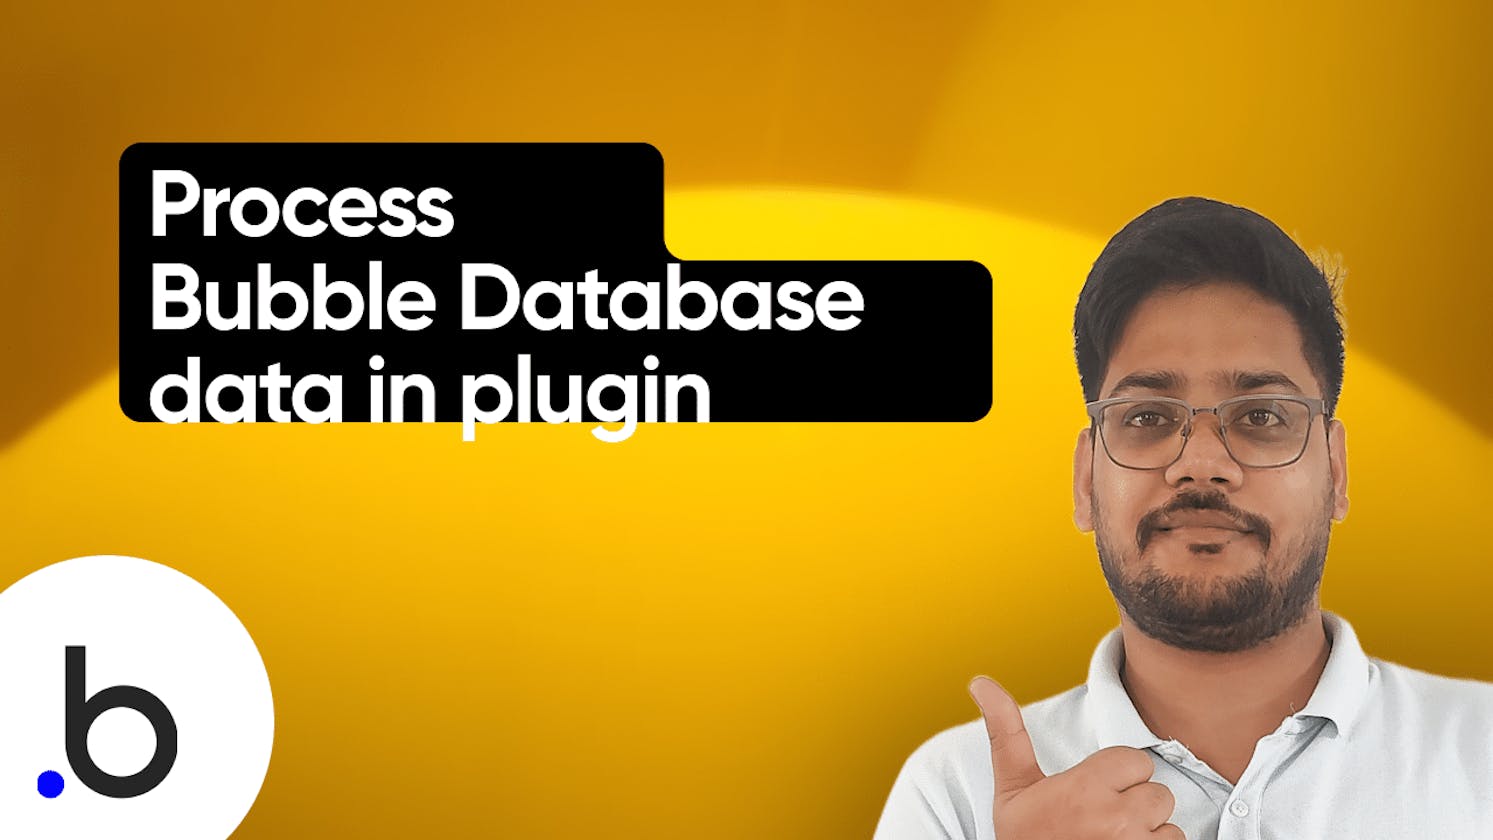 Work with Bubble database data in Plugin editor